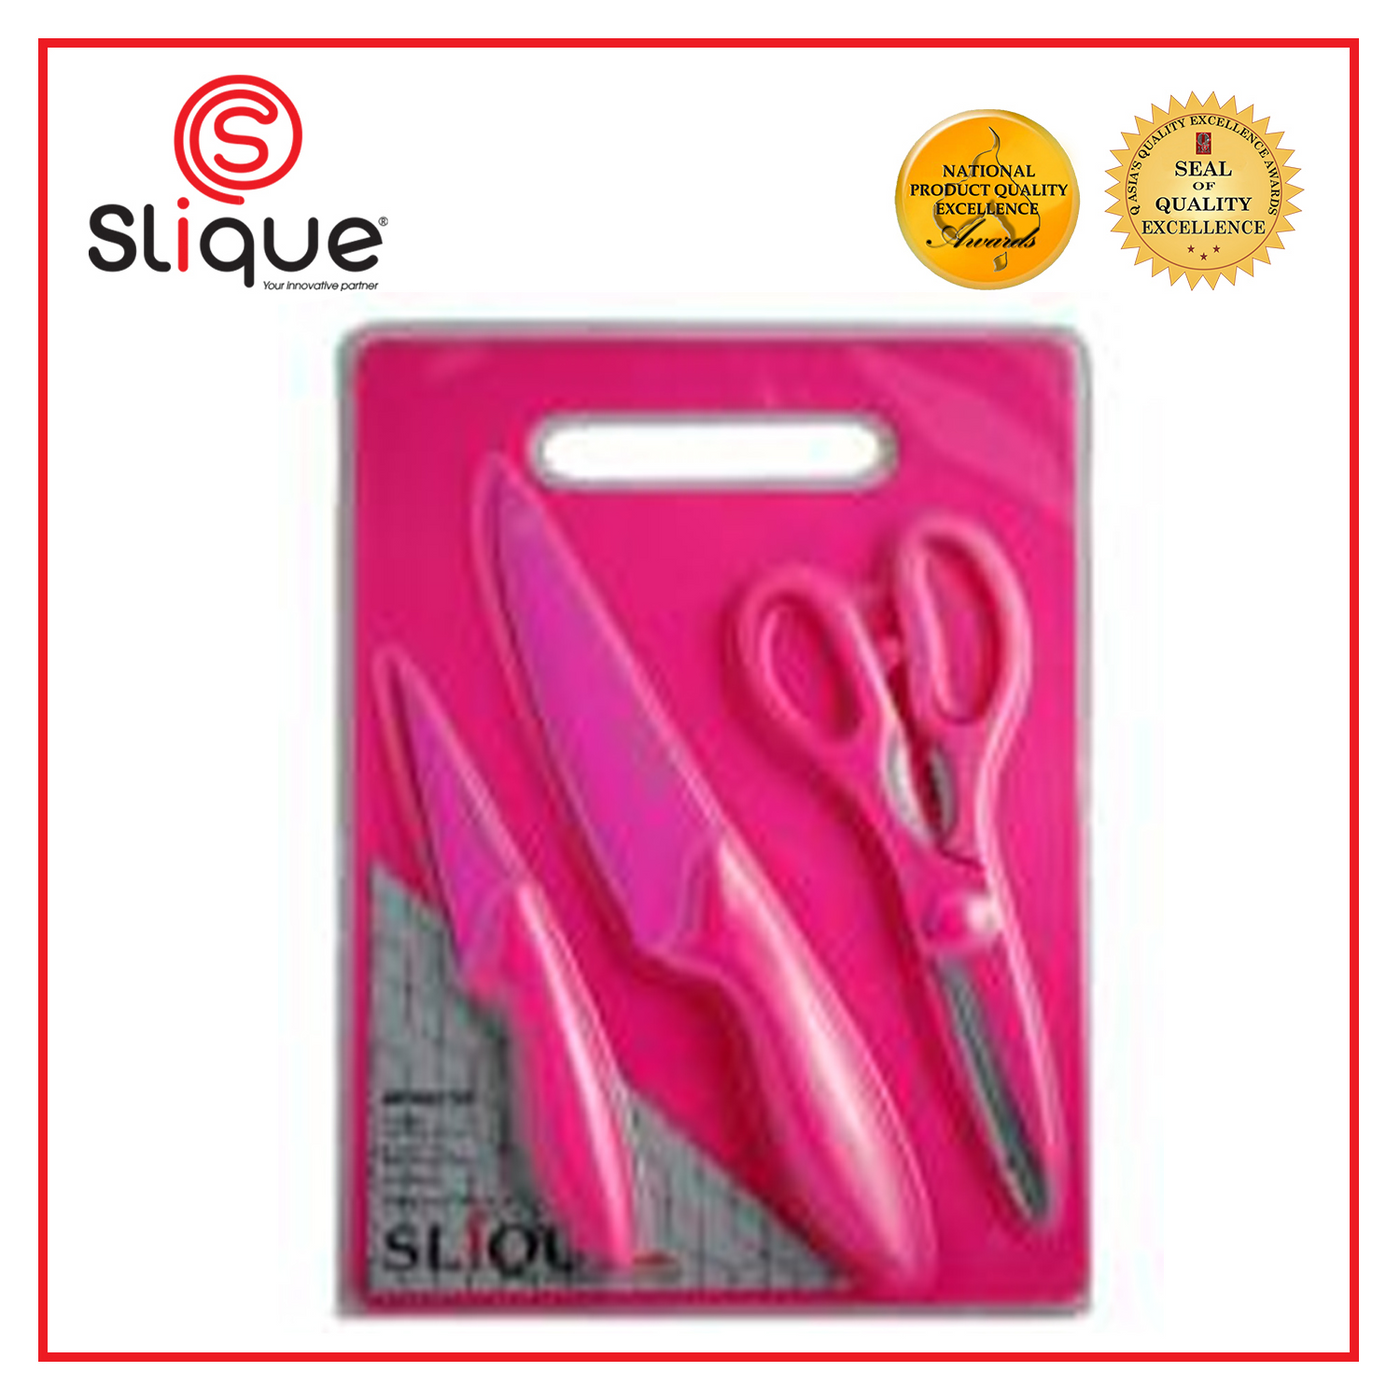 SLIQUE Premium Stainless Steel Non-Stick Kitchen Knife w/ Scissors Cutting Board Set of 5 Amazing Gift Idea For Any Occasion! (Pink)